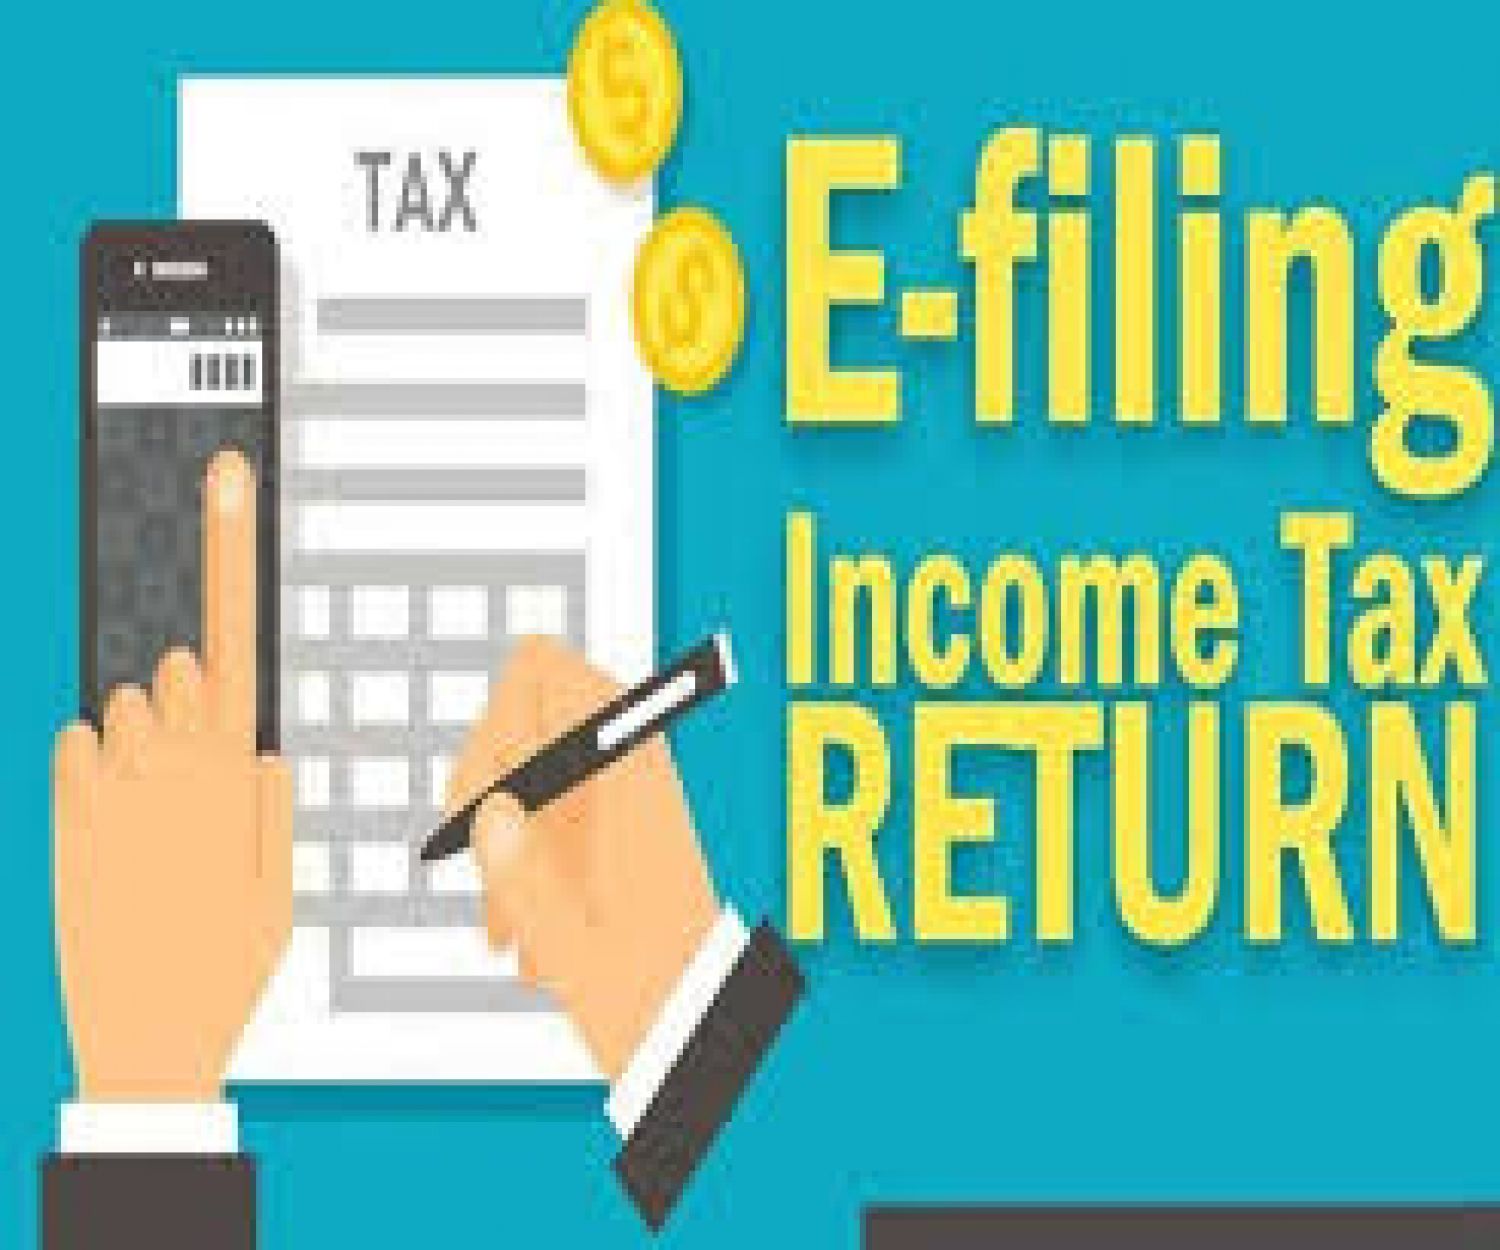 Change in law of belated return in income tax from A.Y. belated return u/s 139(4)